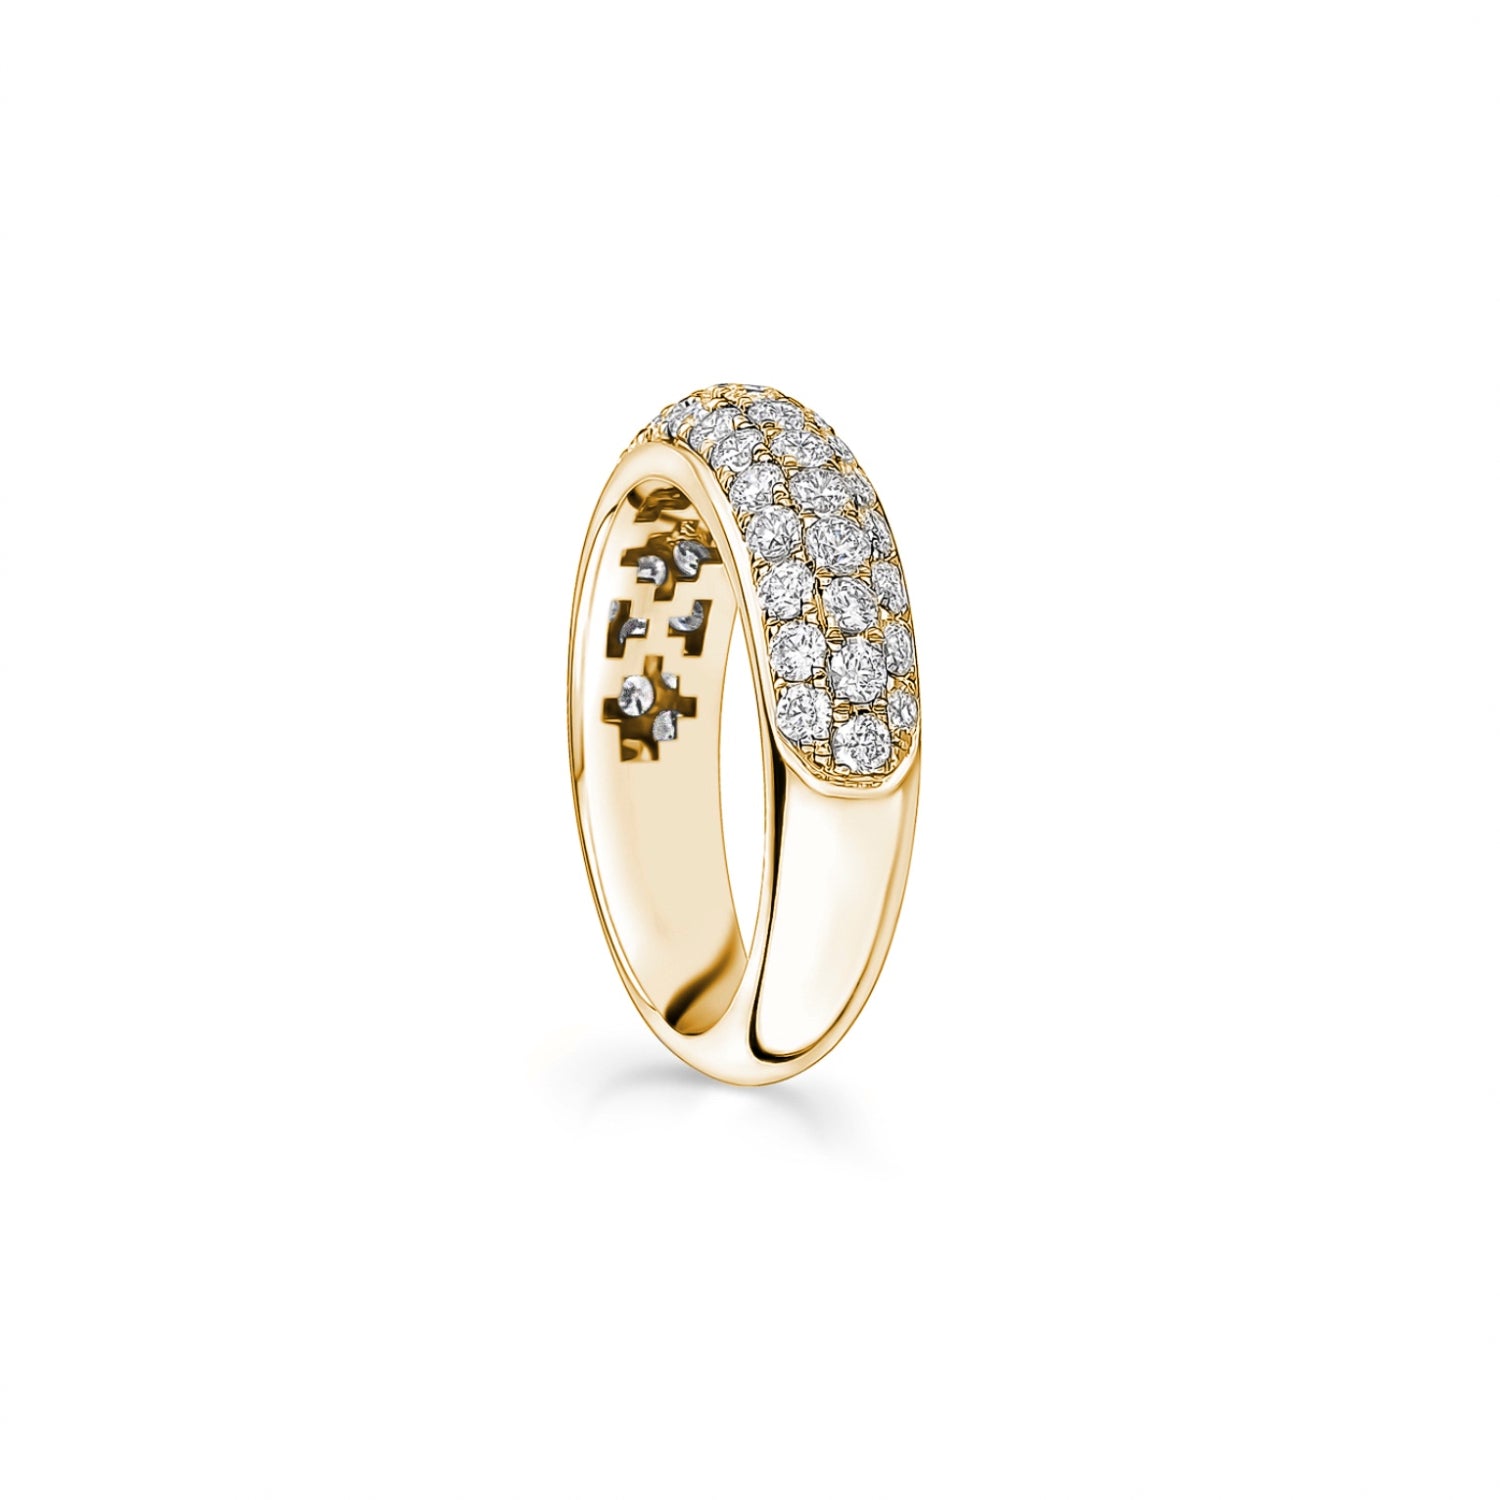 Three-Row Diamond Pavé Domed Ring in Yellow Gold Side View